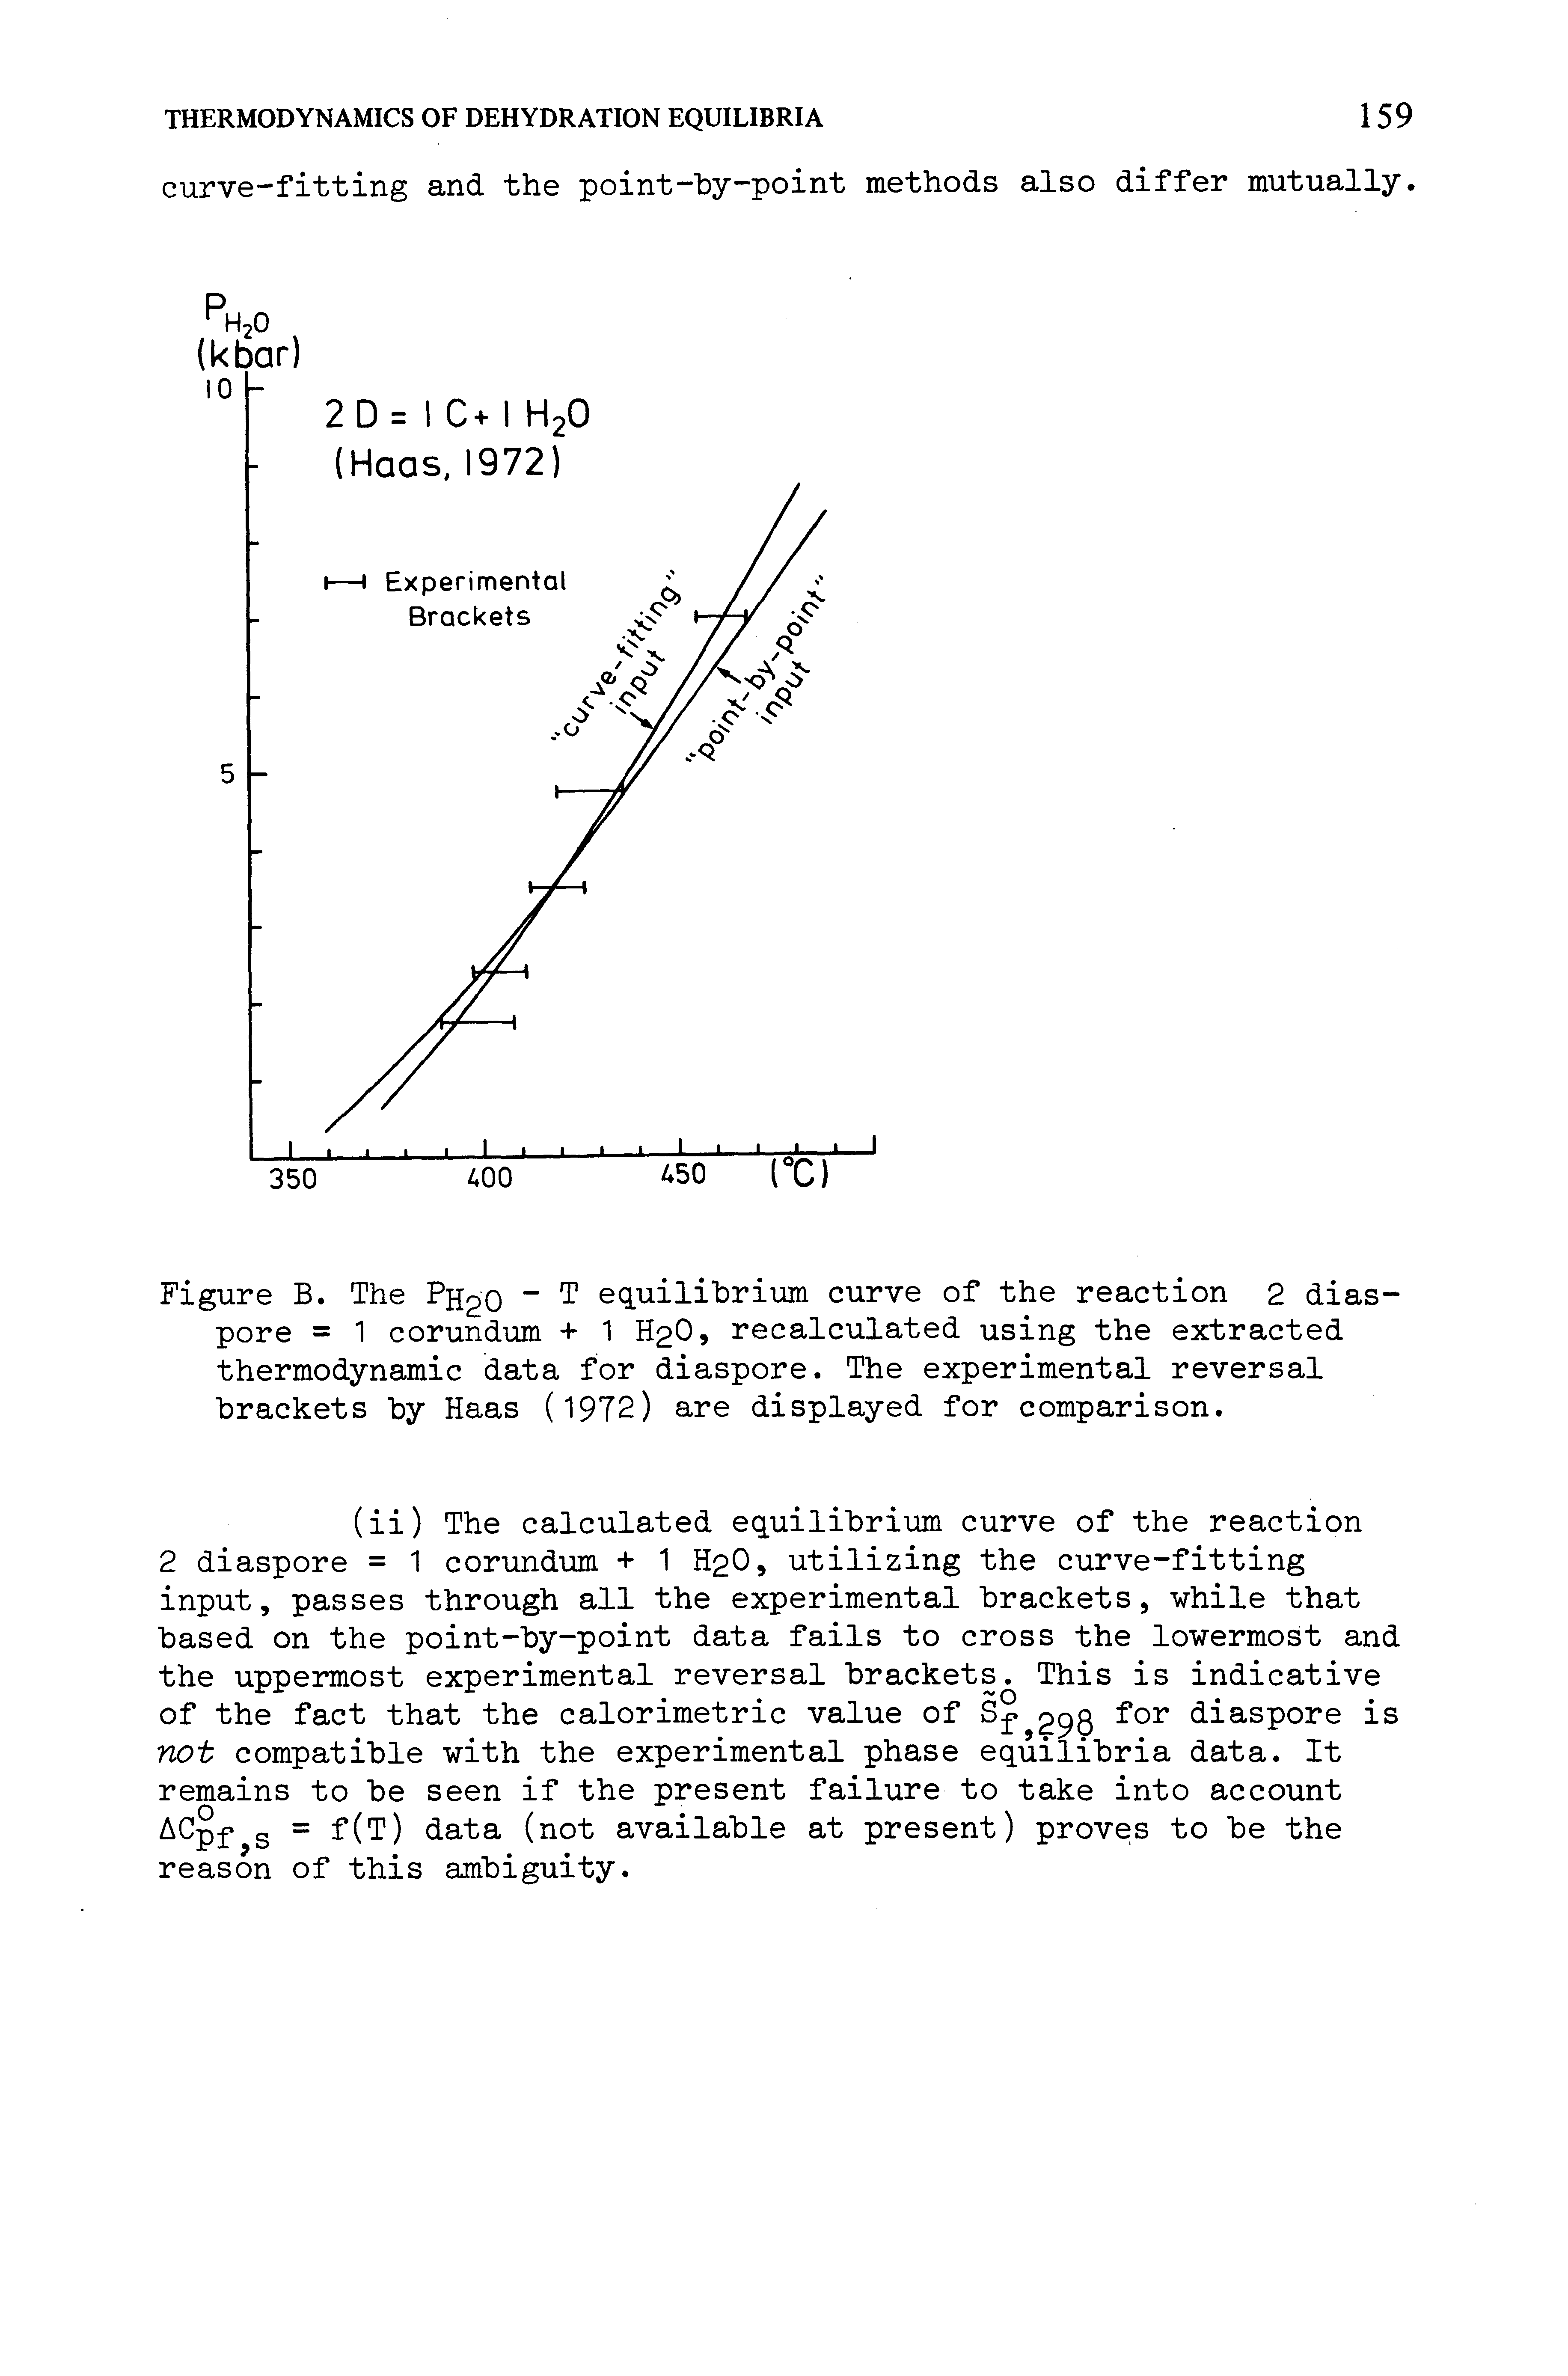 Figure B. The PH2 0 equilibrium curve of the reaction 2 dias-pore = 1 corundum + 1 H2O, recalculated using the extracted thermodynamic data for diaspore. The experimental reversal brackets by Haas (1972) are displayed for comparison.